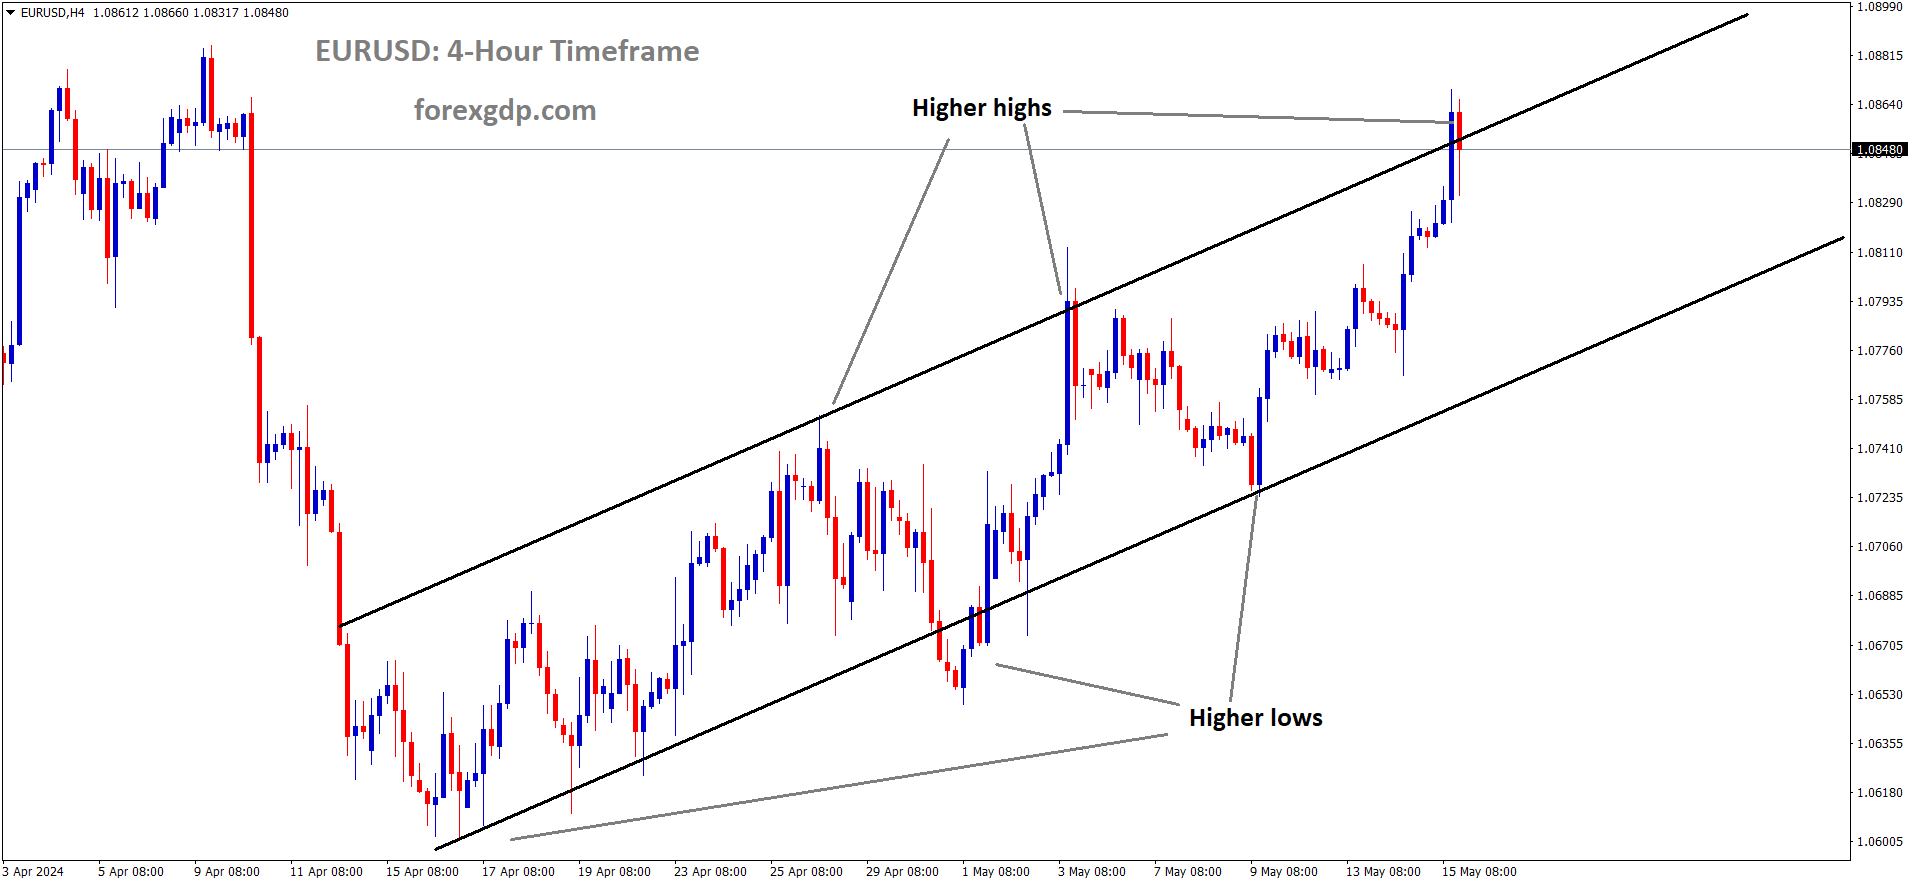 EURUSD is moving in Ascending channel and market has reached higher high area of the channel